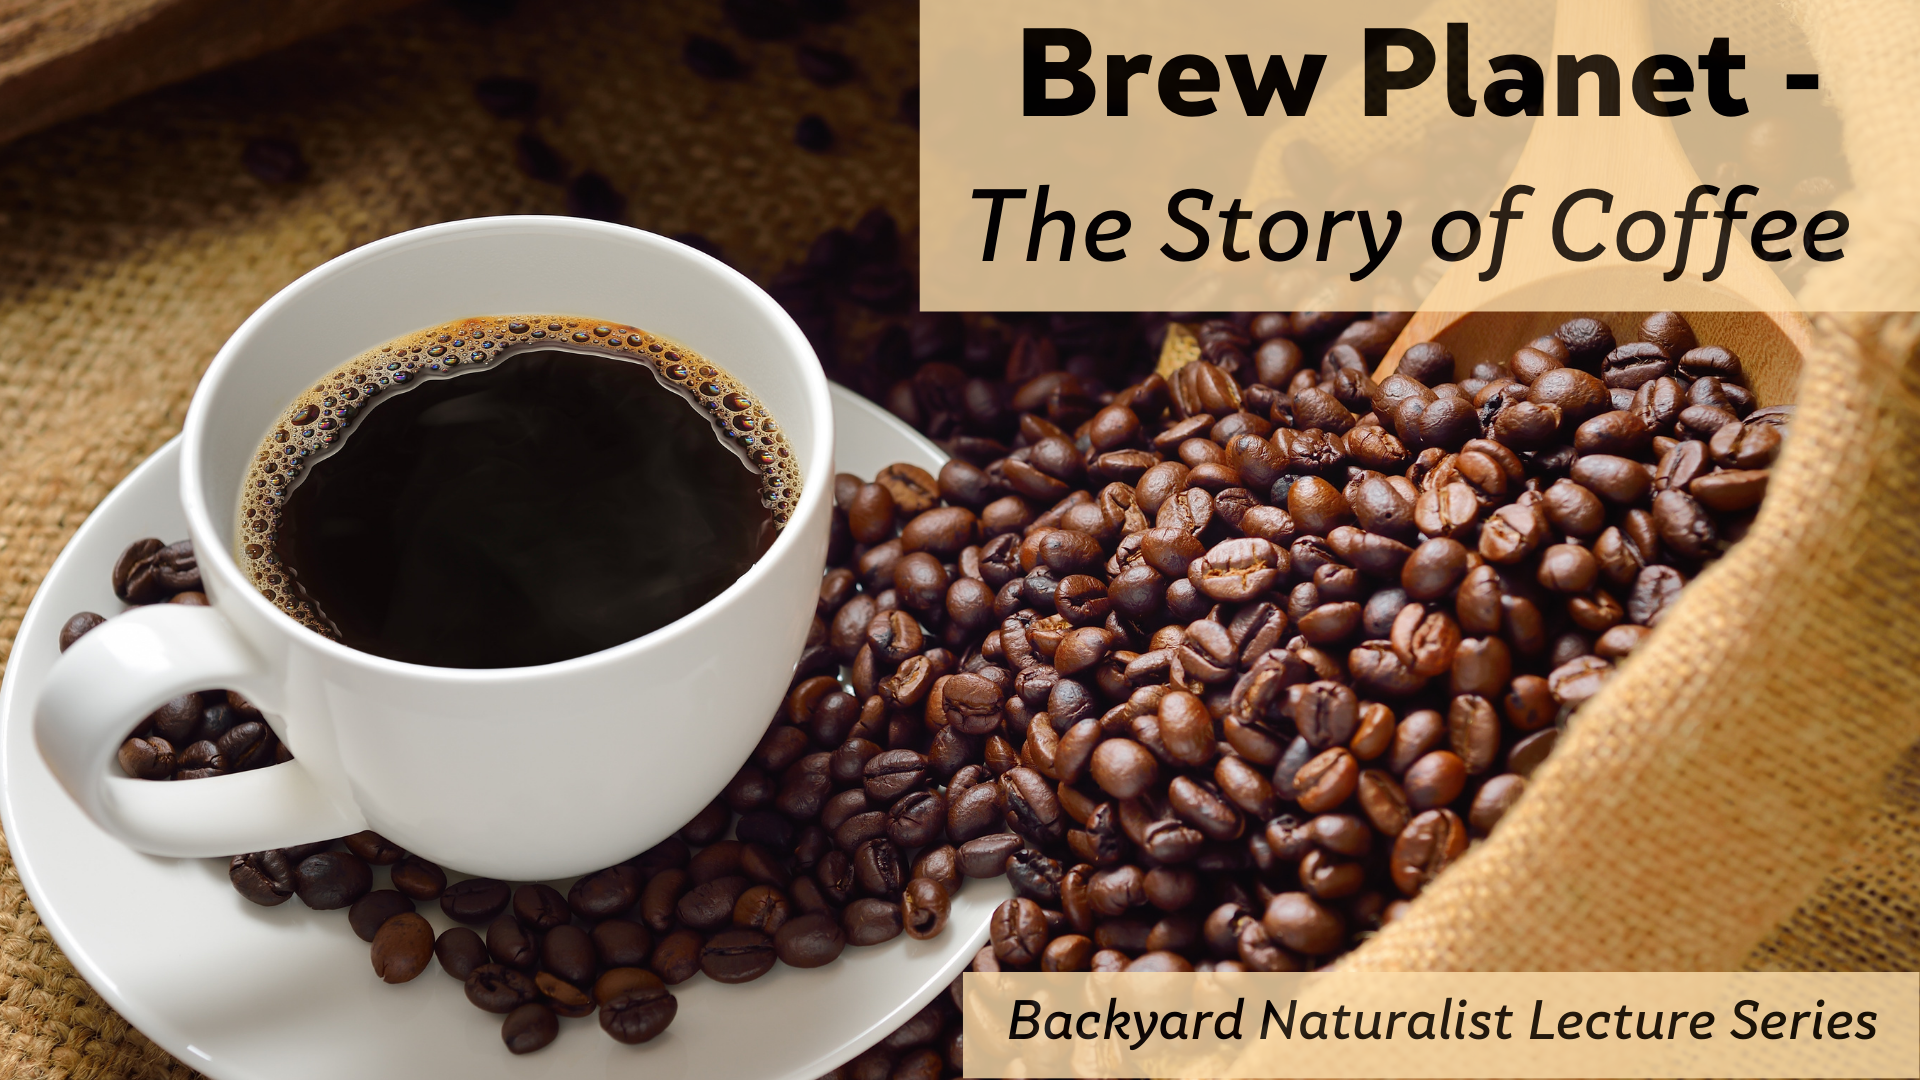 Brew Planet - The Story of Coffee - Backyard Naturalist Lecture Series